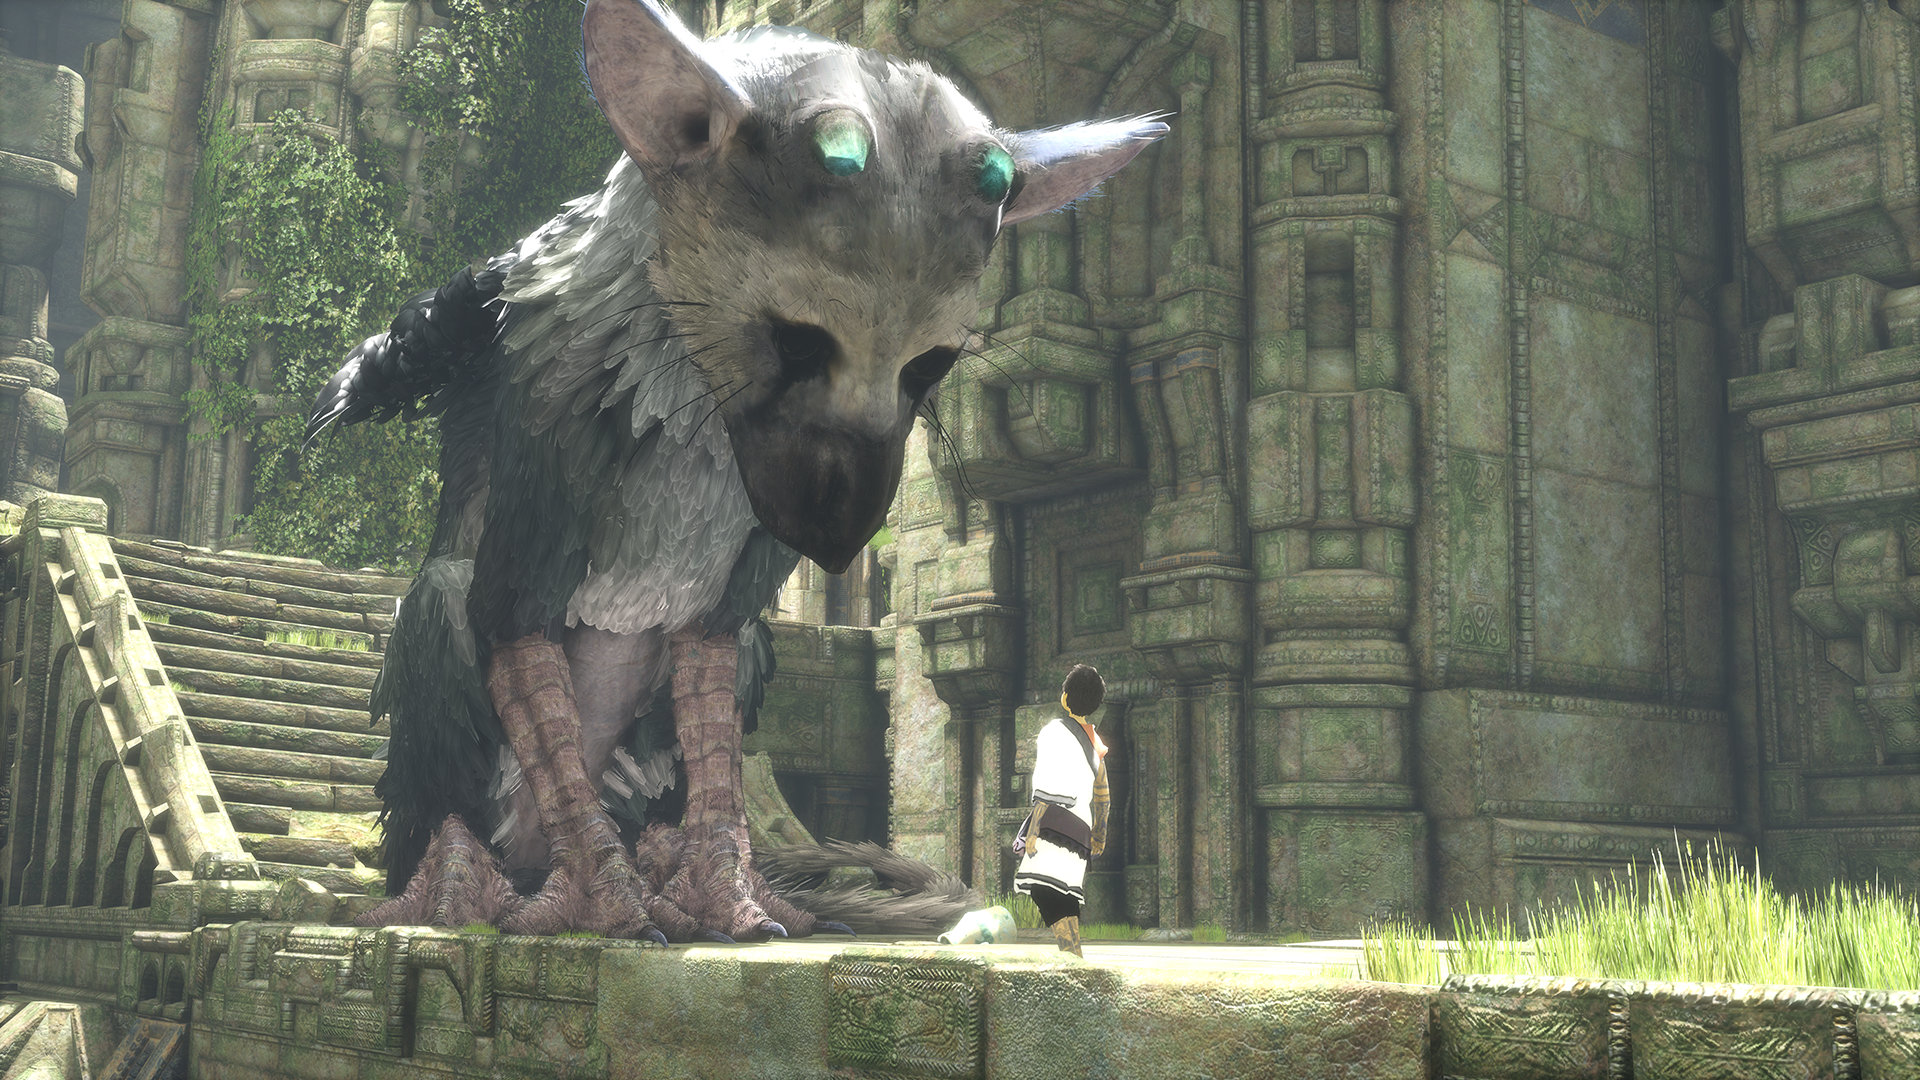 Since Sony Playstation did remake like Shadow of the Colossus and